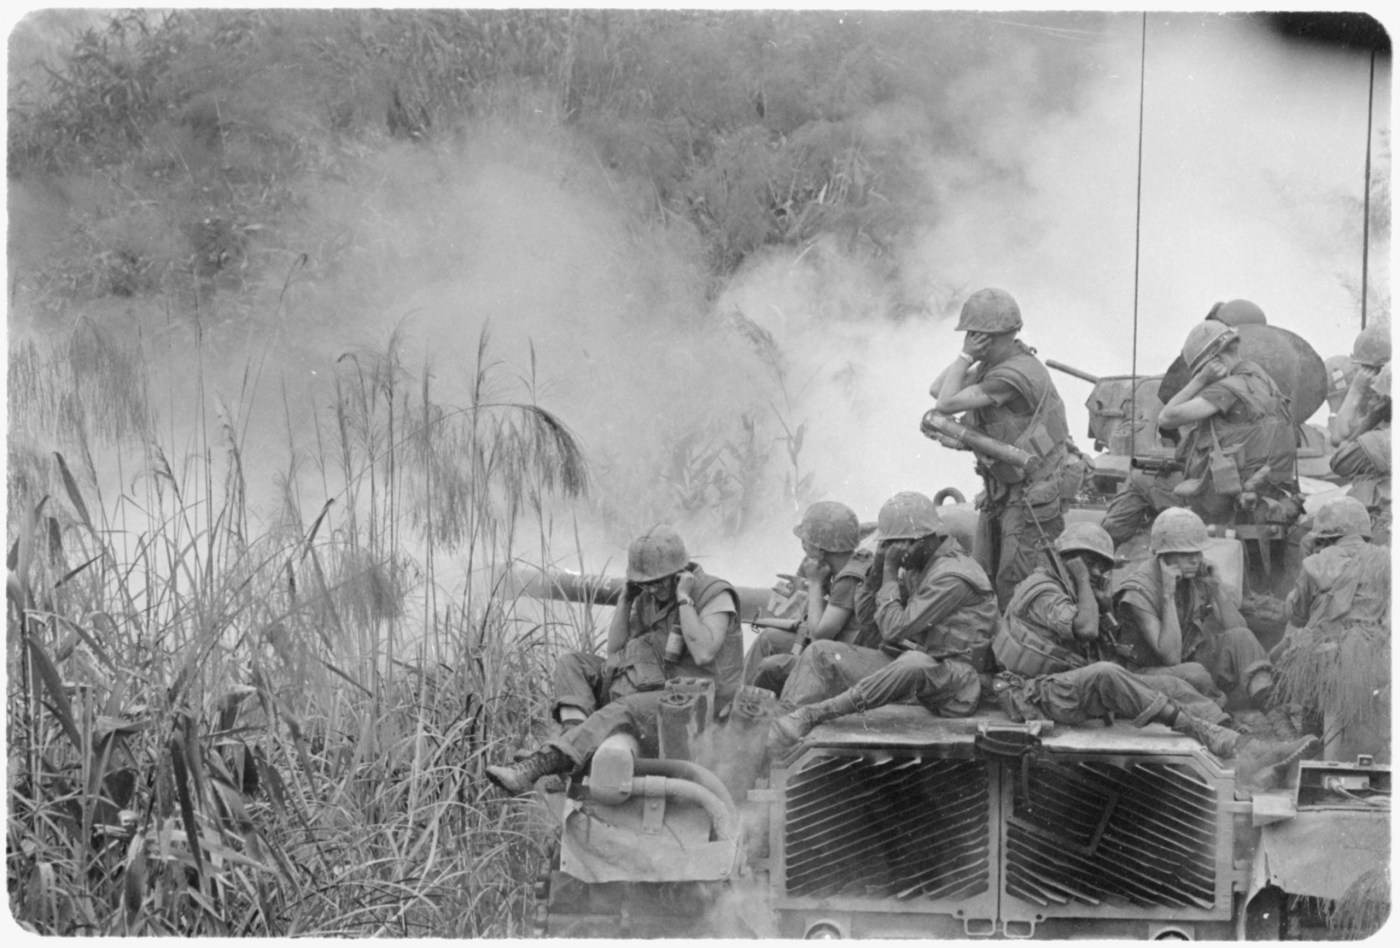 A new analysis of data from the Vietnam era found that LGB Veterans who served at the time are reporting PTSD and poorer mental health more often than their heterosexual counterparts. Here, Marines ride atop a tank during a road sweep near Phu Bai in central Vietnam.